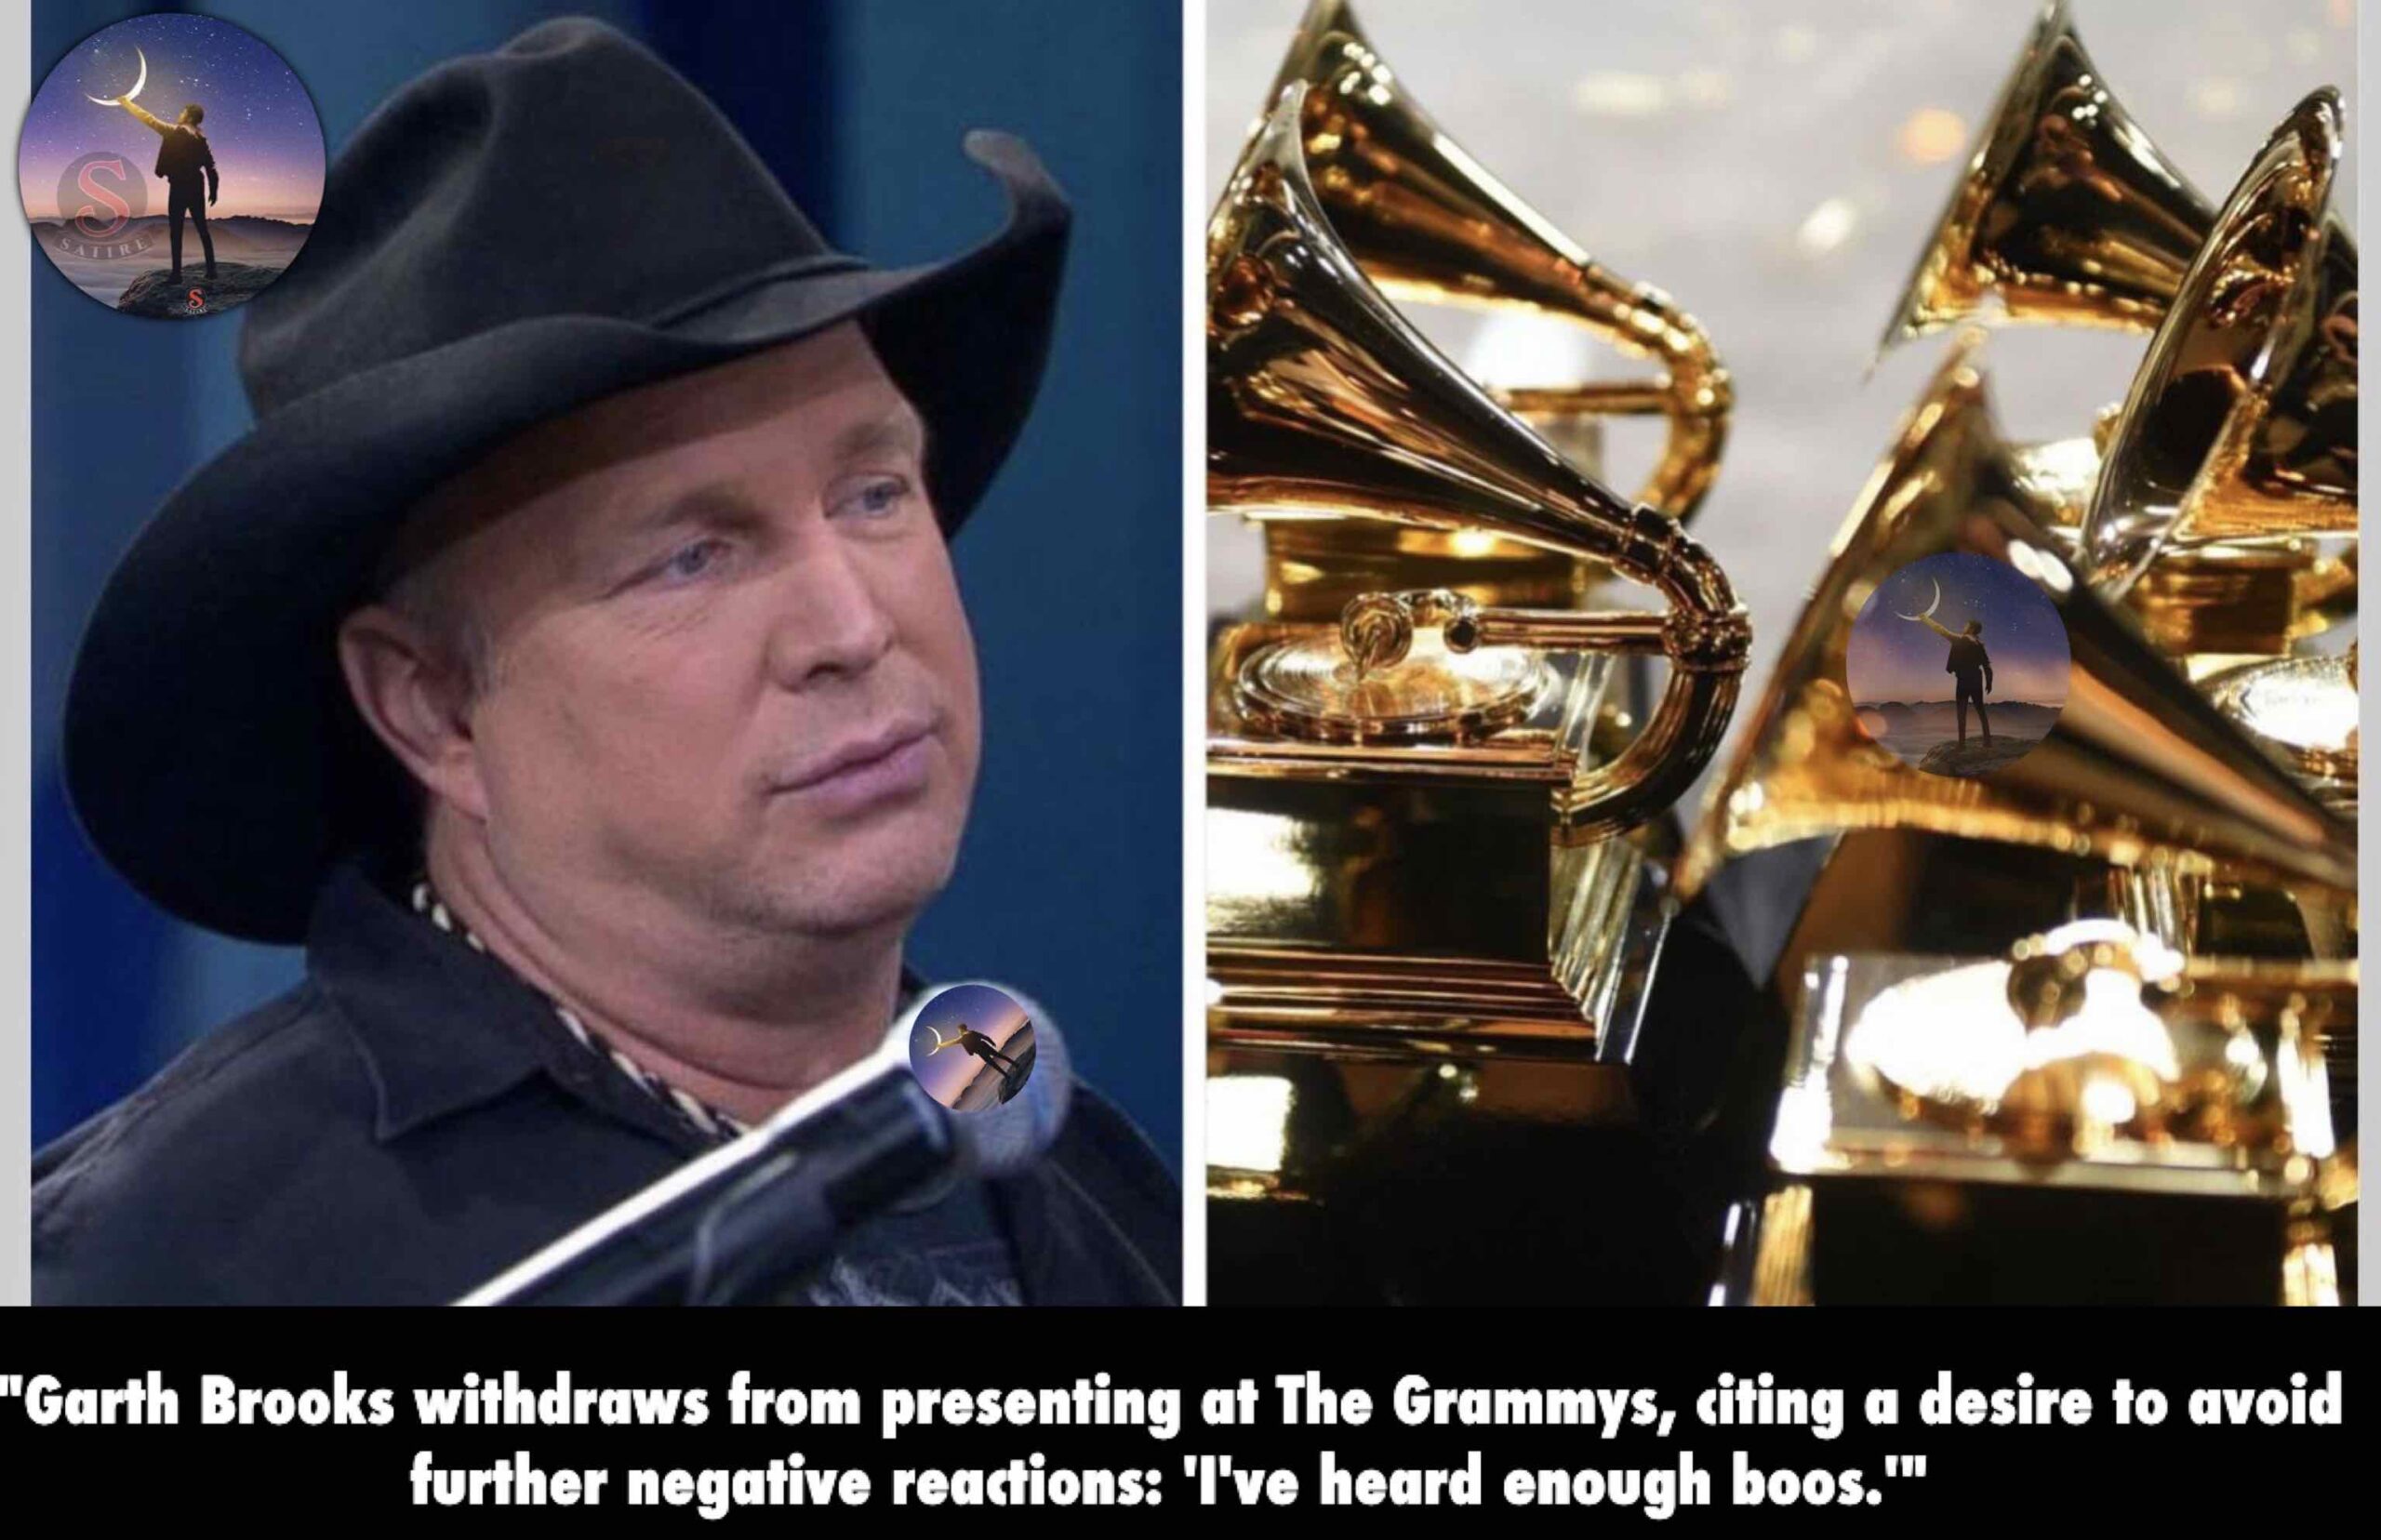 “Garth Brooks withdraws from presenting at The Grammys, citing a desire to avoid further negative reactions: ‘I’ve heard enough boos.'”